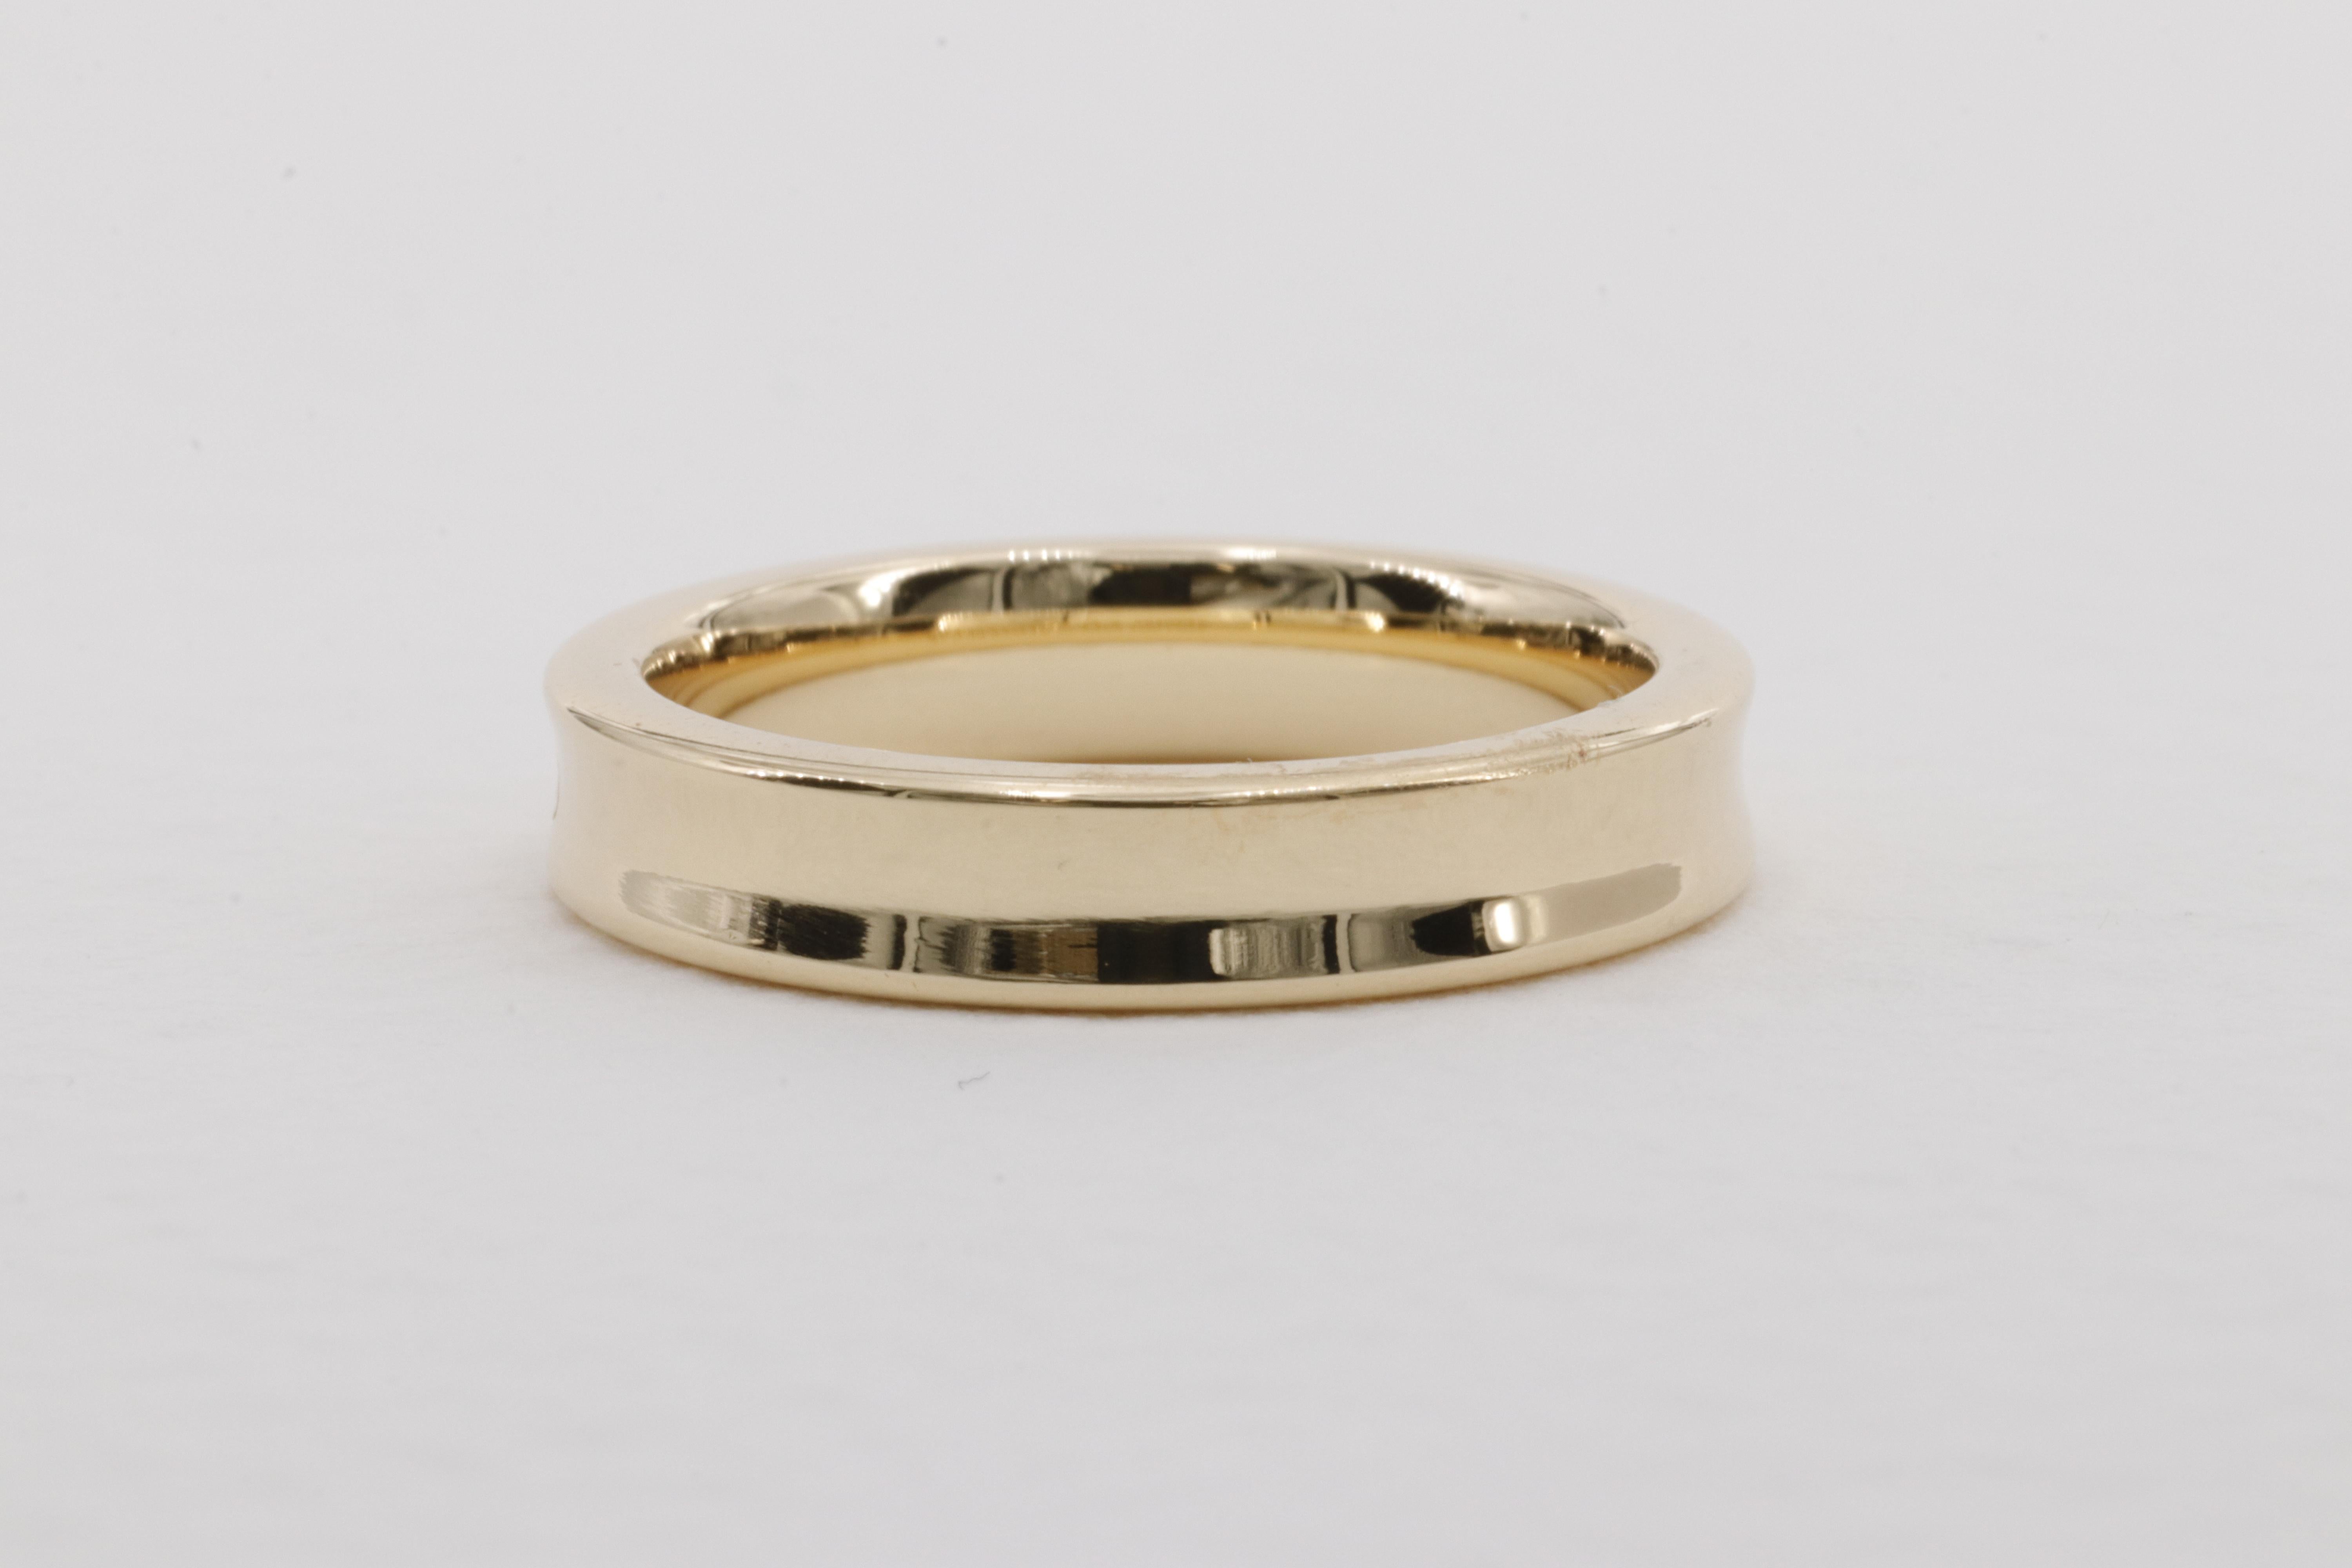 Tiffany & Co. 1837 Diamond Band Ring in 18 Karat Yellow Gold  In Excellent Condition For Sale In Tampa, FL